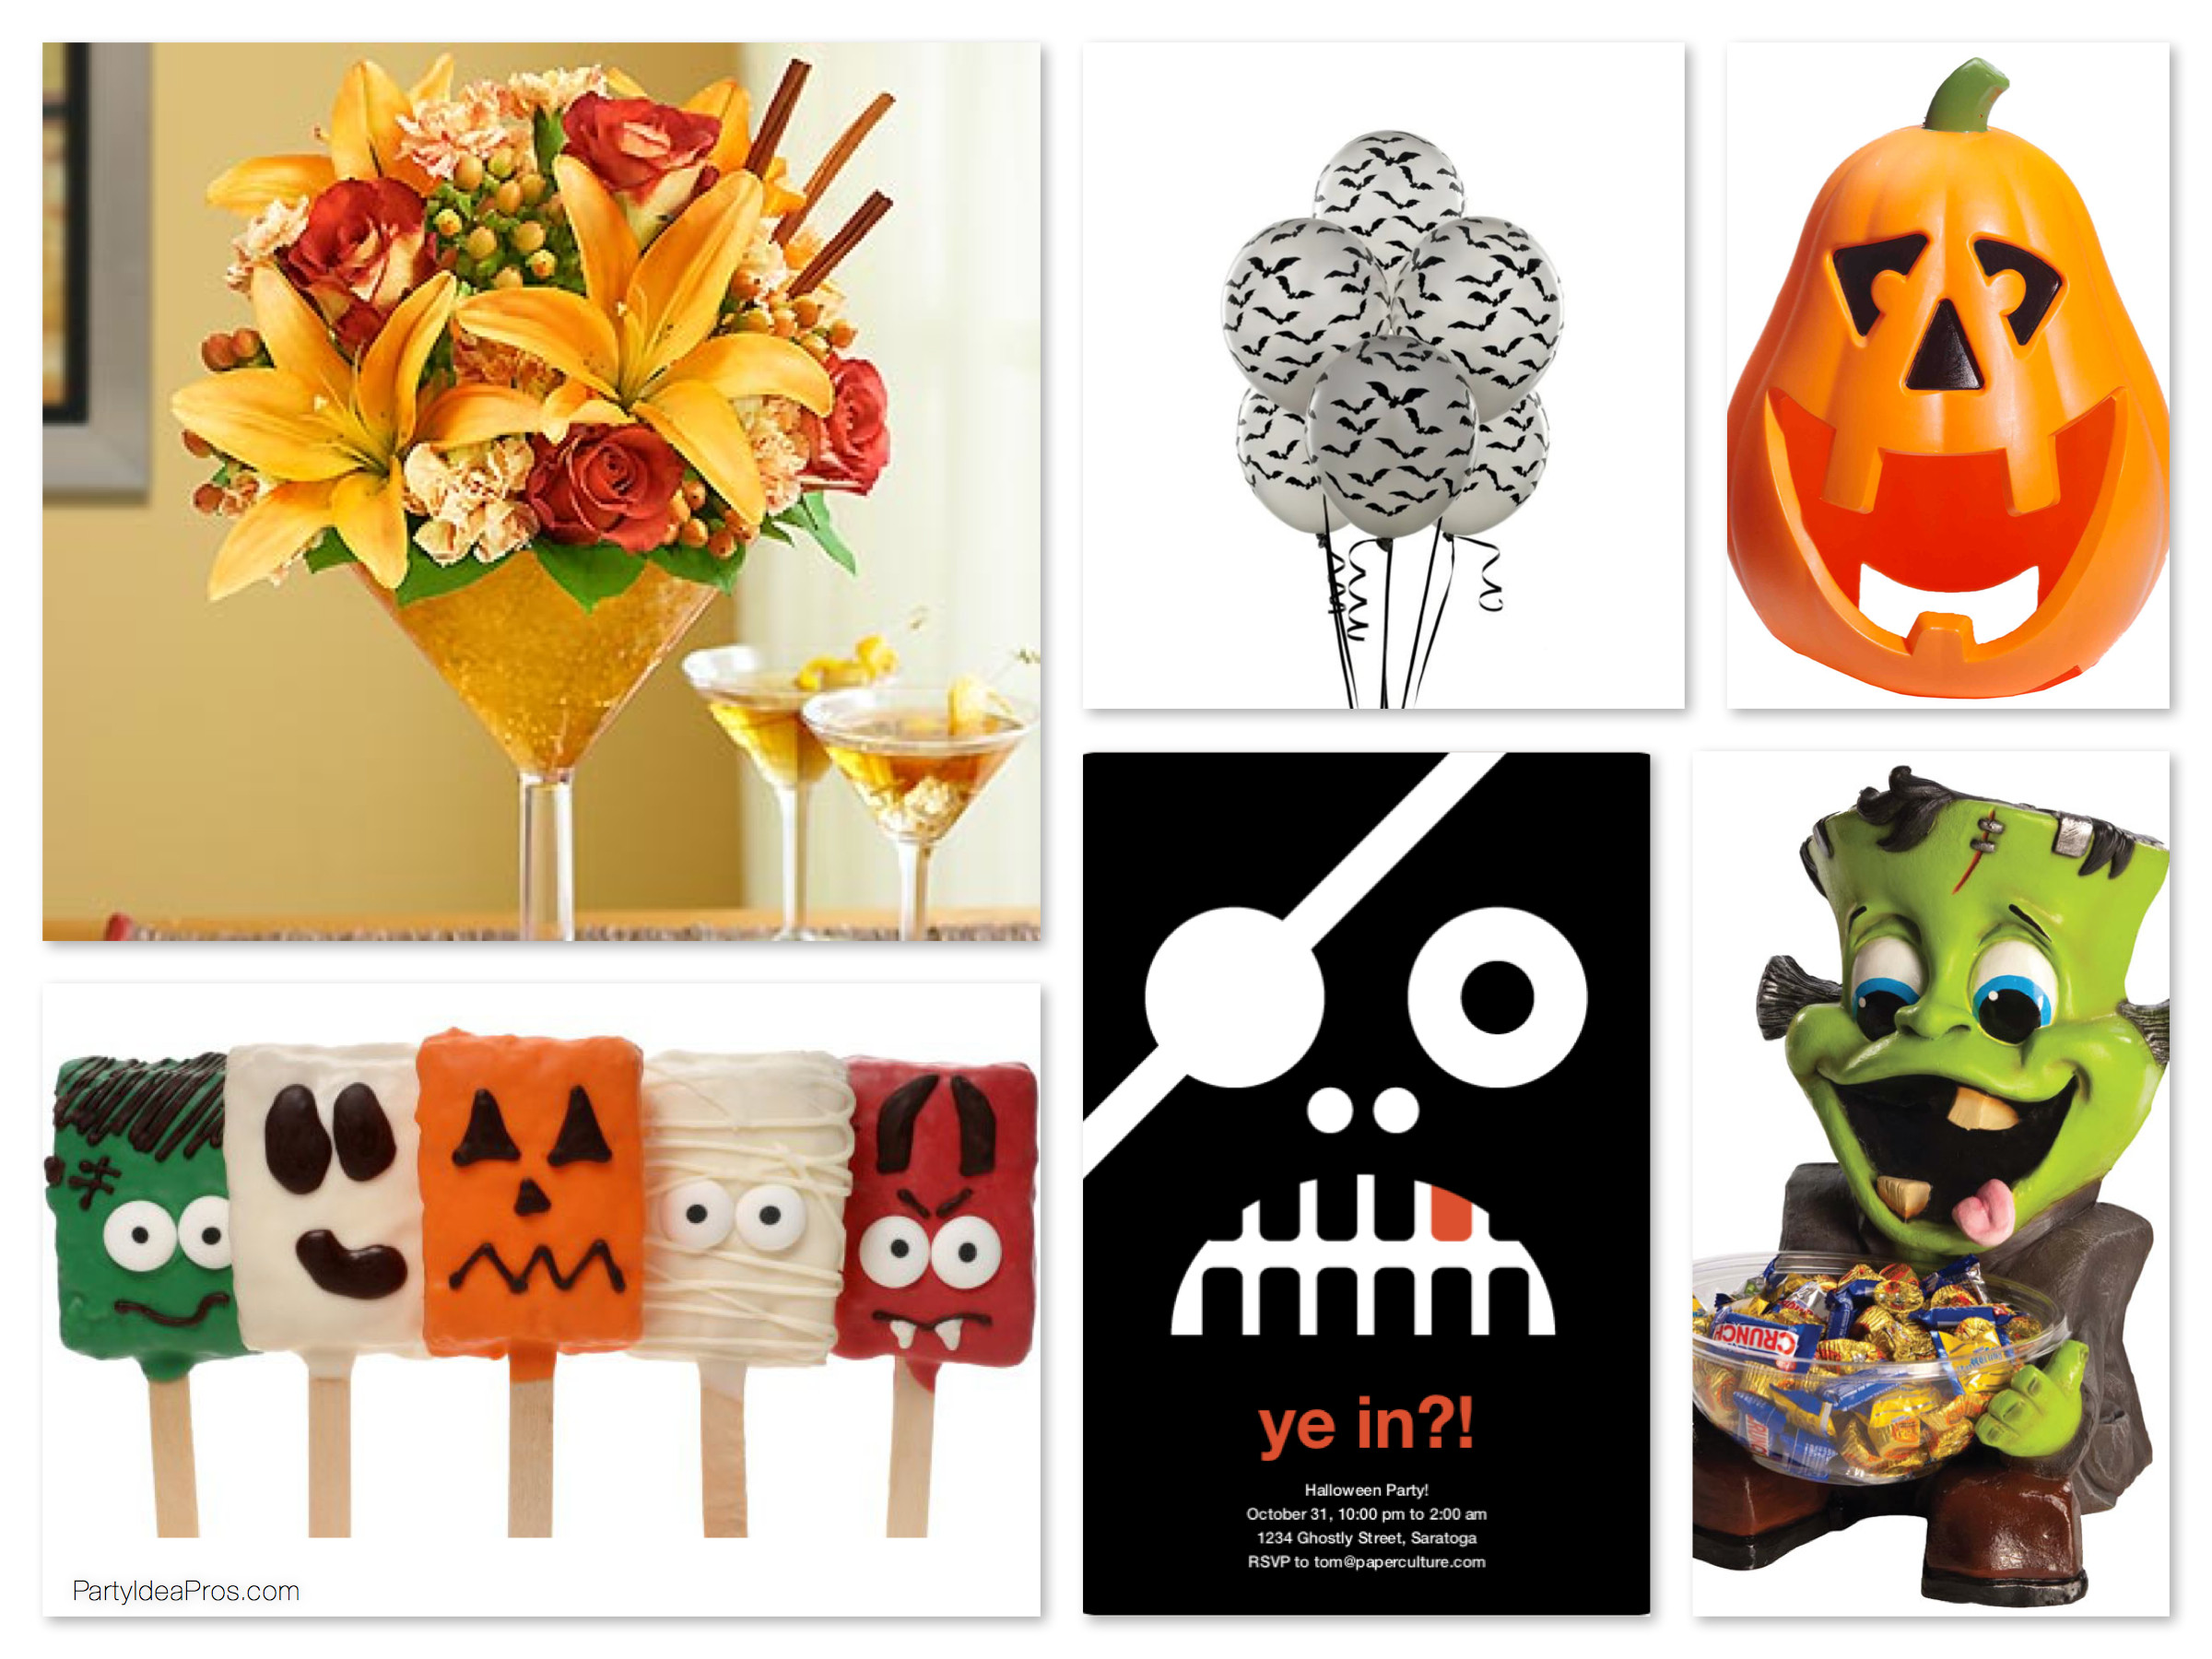 Halloween Party Gift Ideas
 Best Halloween Party Supplies Gift Ideas Decorations